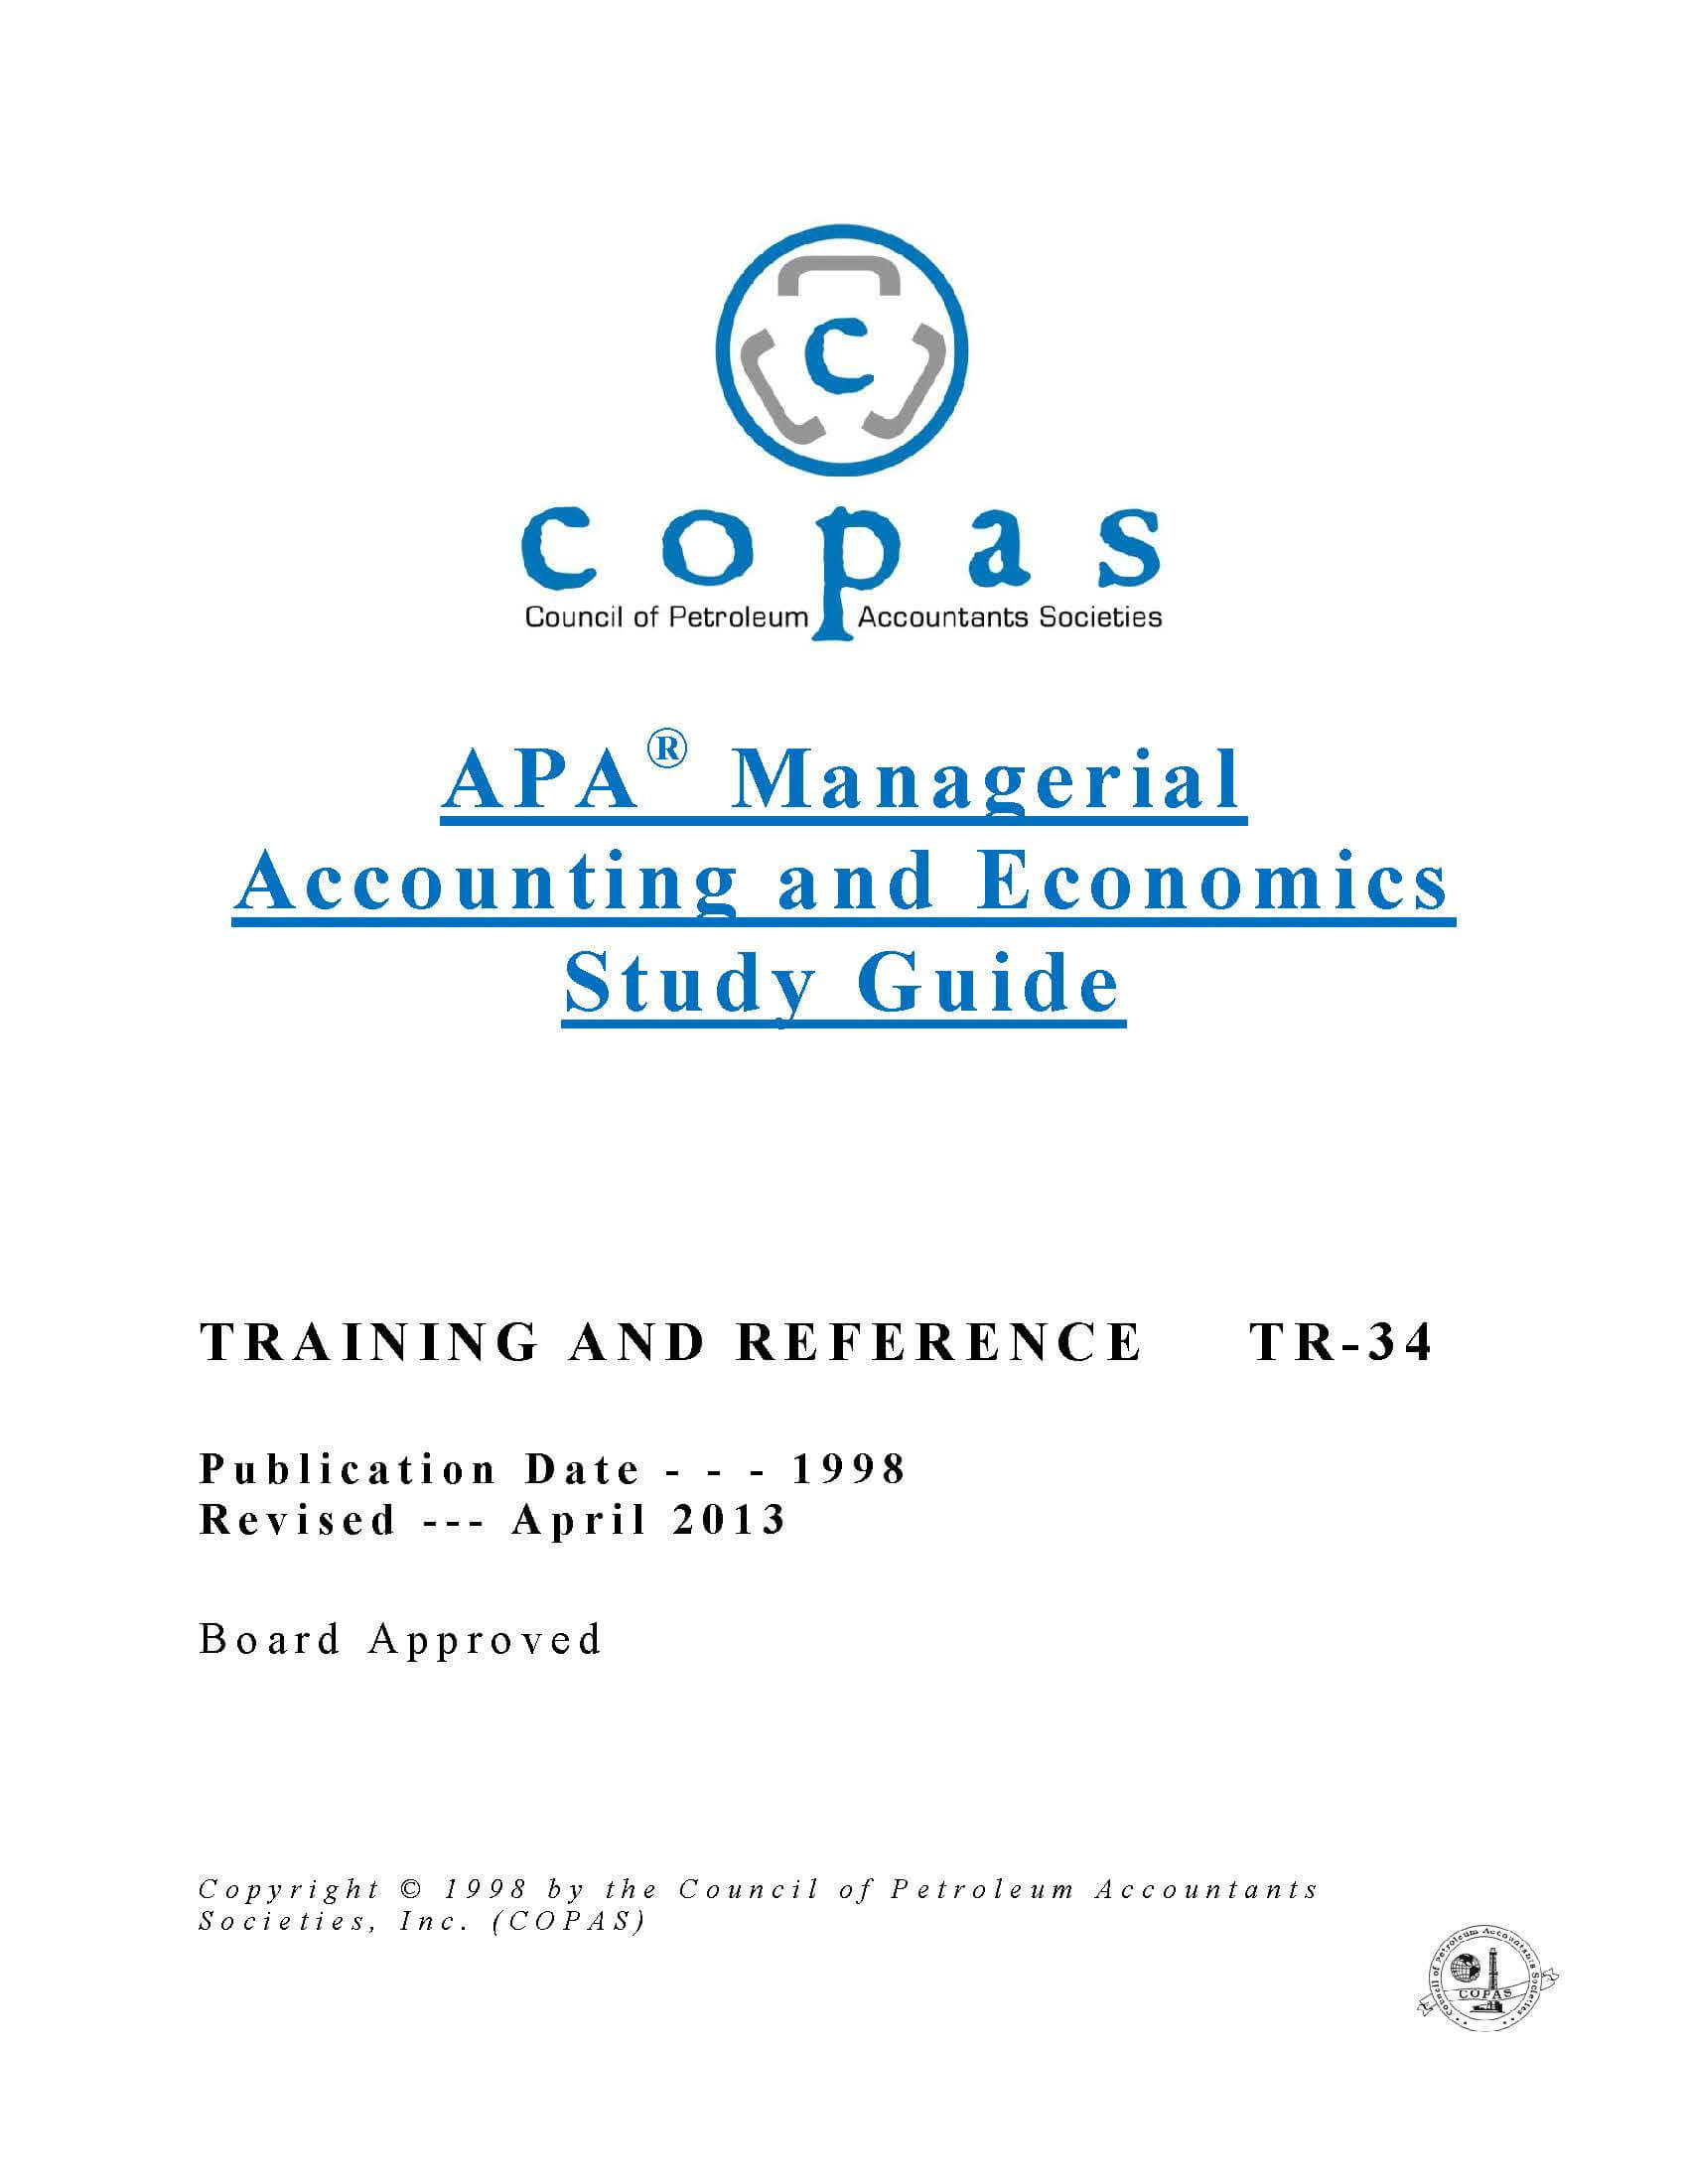 TR-34 APA® Managerial Accounting and Economics Study Guide - products TR 34 APA Managerial Study Guide - Council of Petroleum Accountants Societies